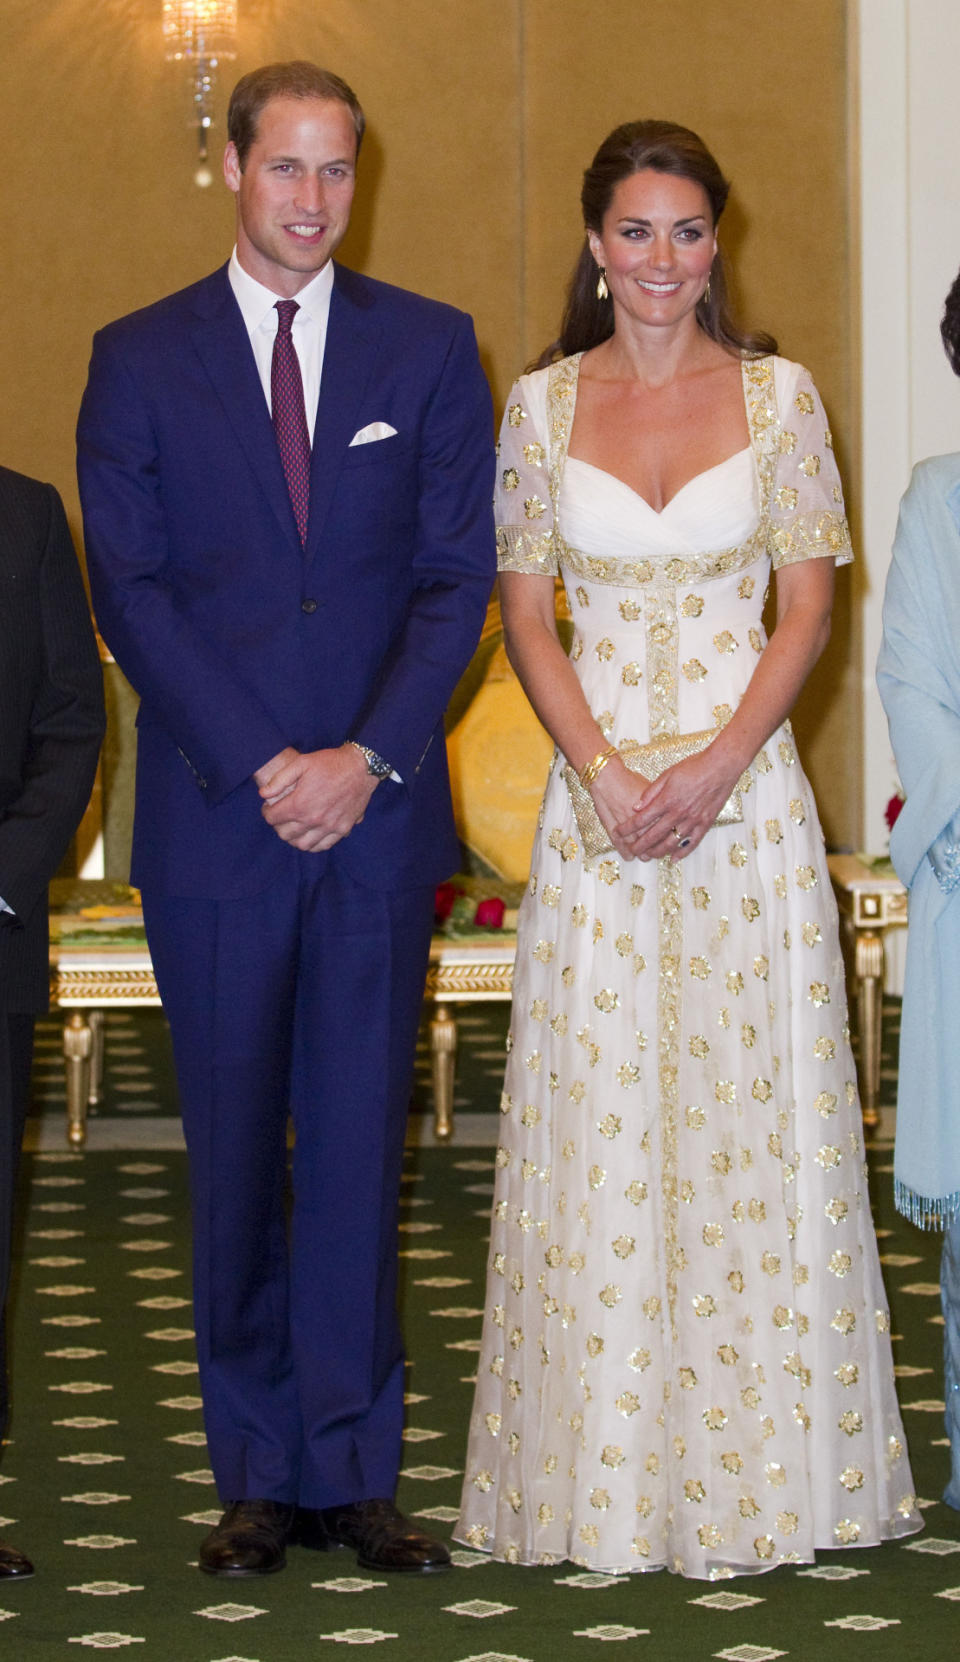 <p>The Duchess attended a dinner with the King of Malaysia wearing a head-turning custom Alexander McQueen gown. Designed in a cream shade with gold embroidery, Kate carried a golden clutch by Wilbur and Gussie. </p><p><i>[Photo: PA]</i></p>